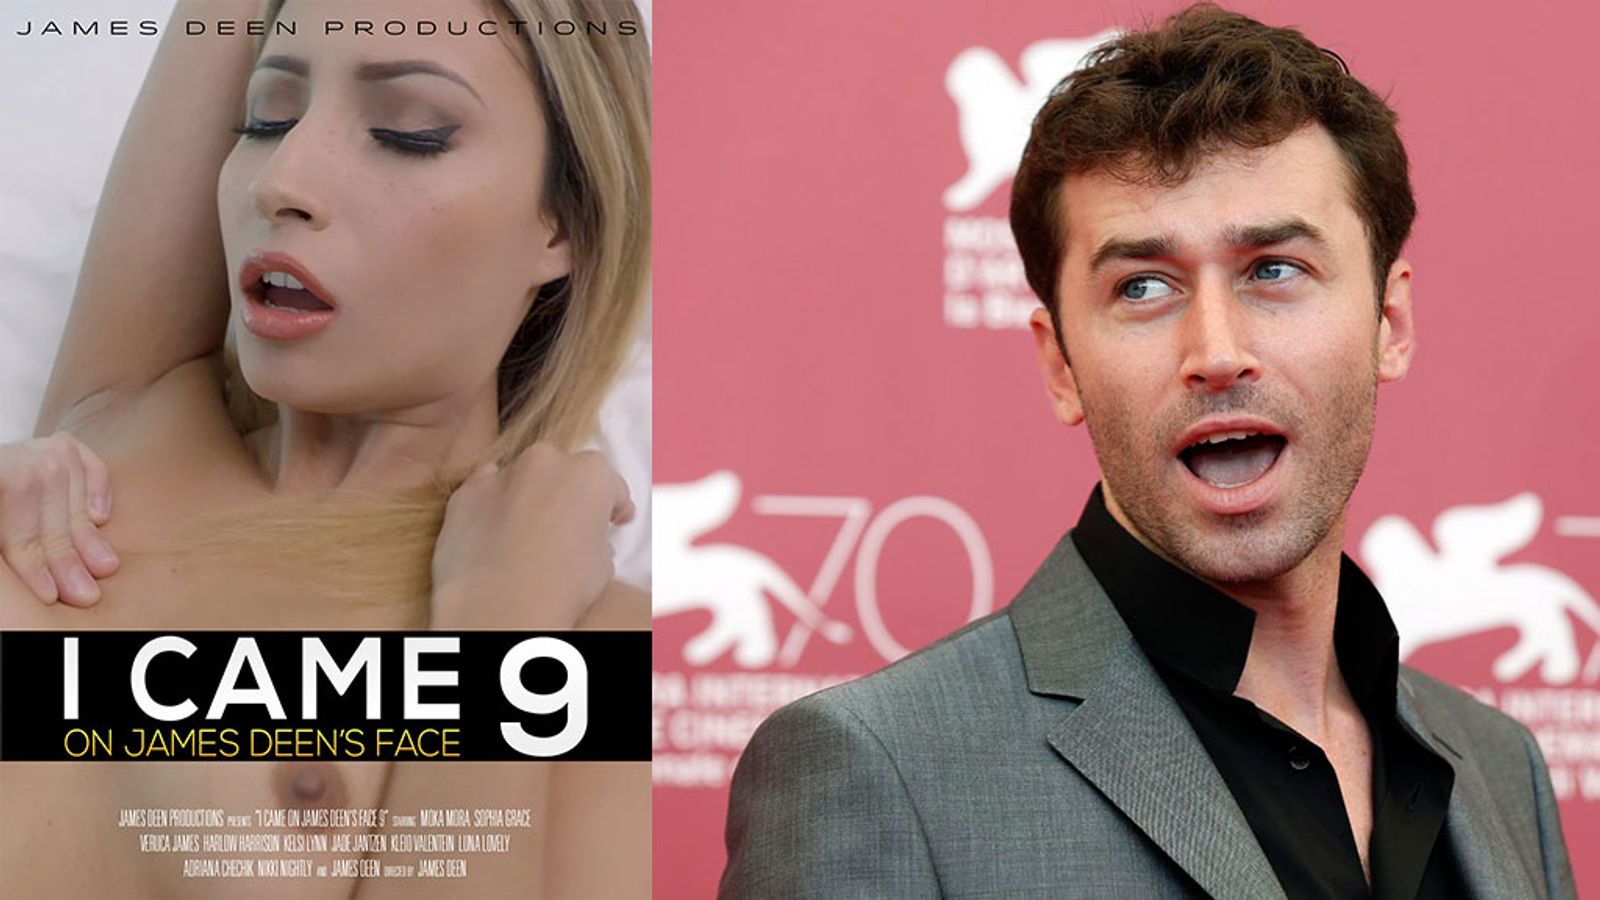 Guess Who Came On James Deen's Face? 9th Vol. Of Series Releases